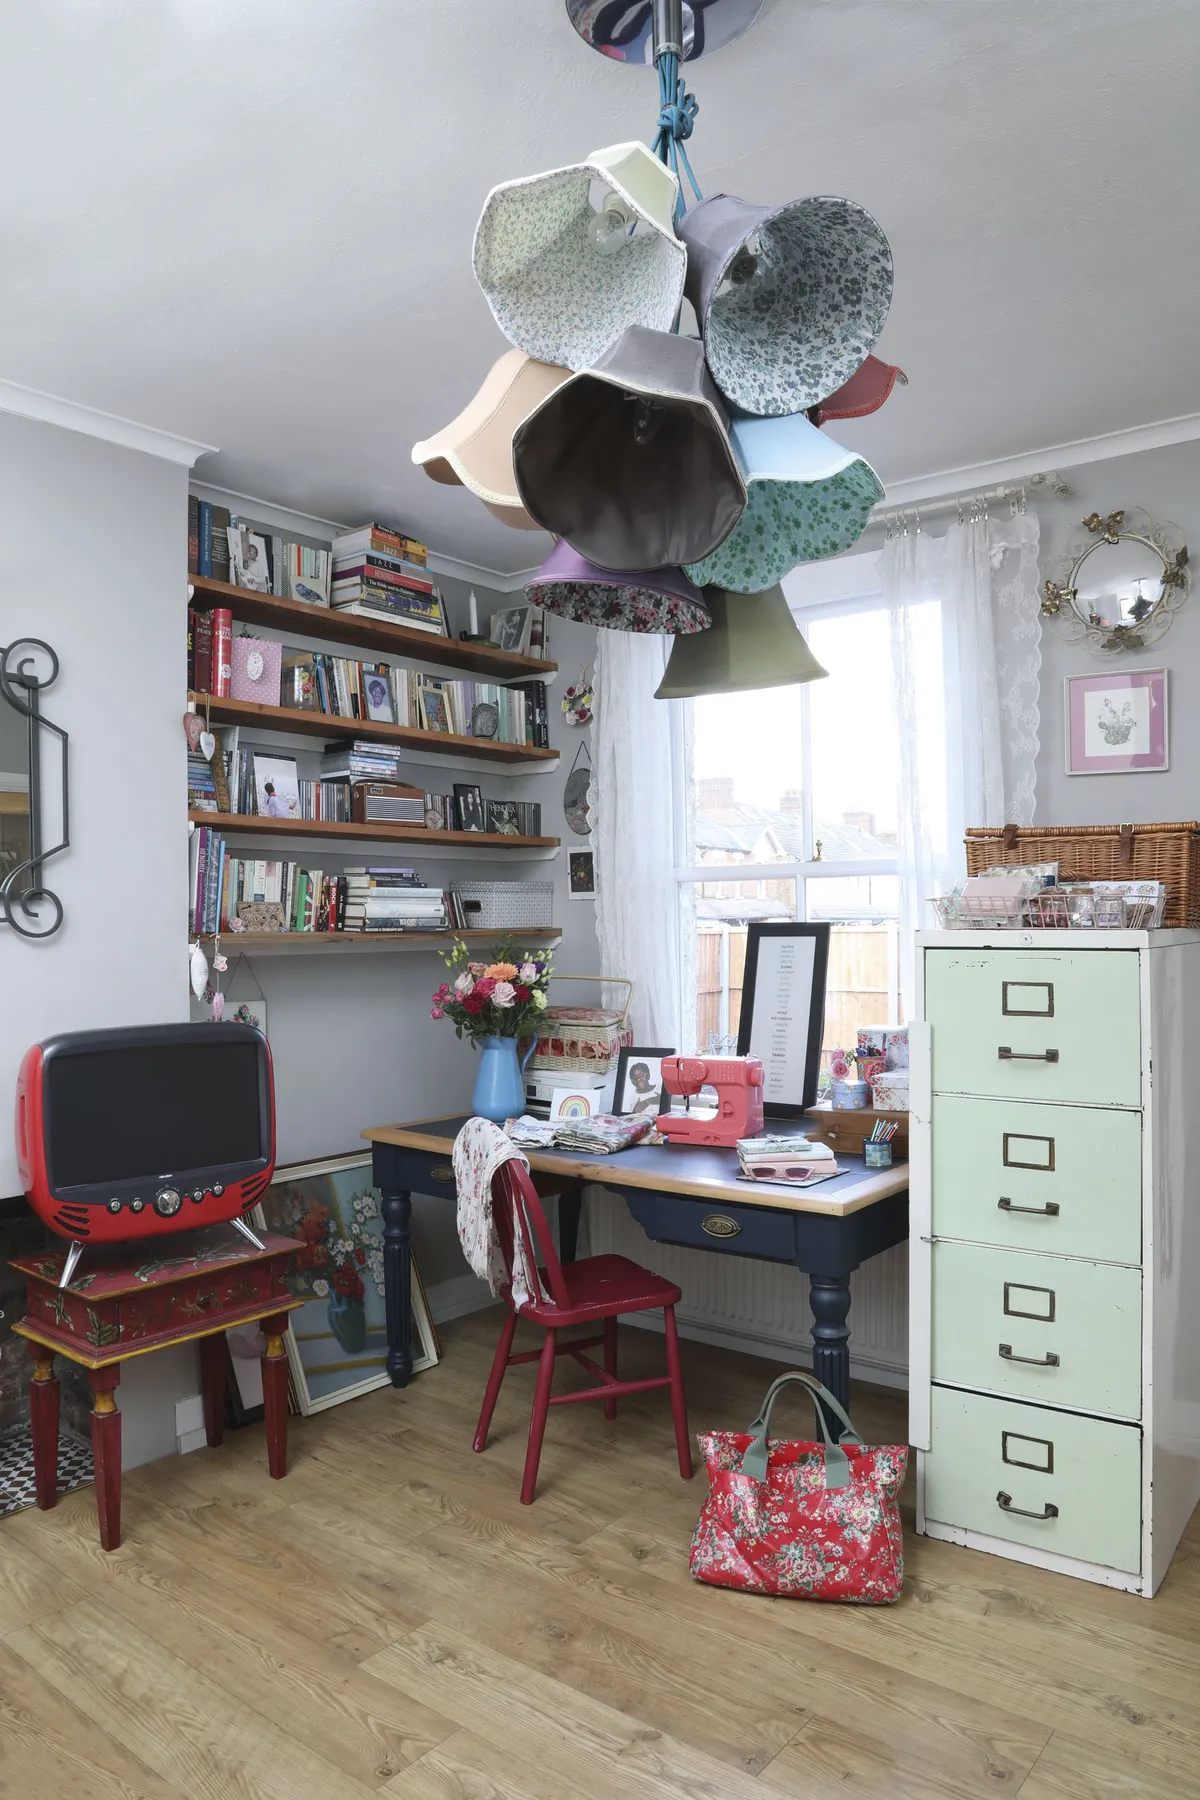 As well as working on her laptop, Hildah also enjoys crafting at her desk. The solid oak desk was from an antiques emporium, while the green filing cabinet was a charity shop buy. A lampshade chandelier adds a fun, colourful touch, fitting for a creative workspace